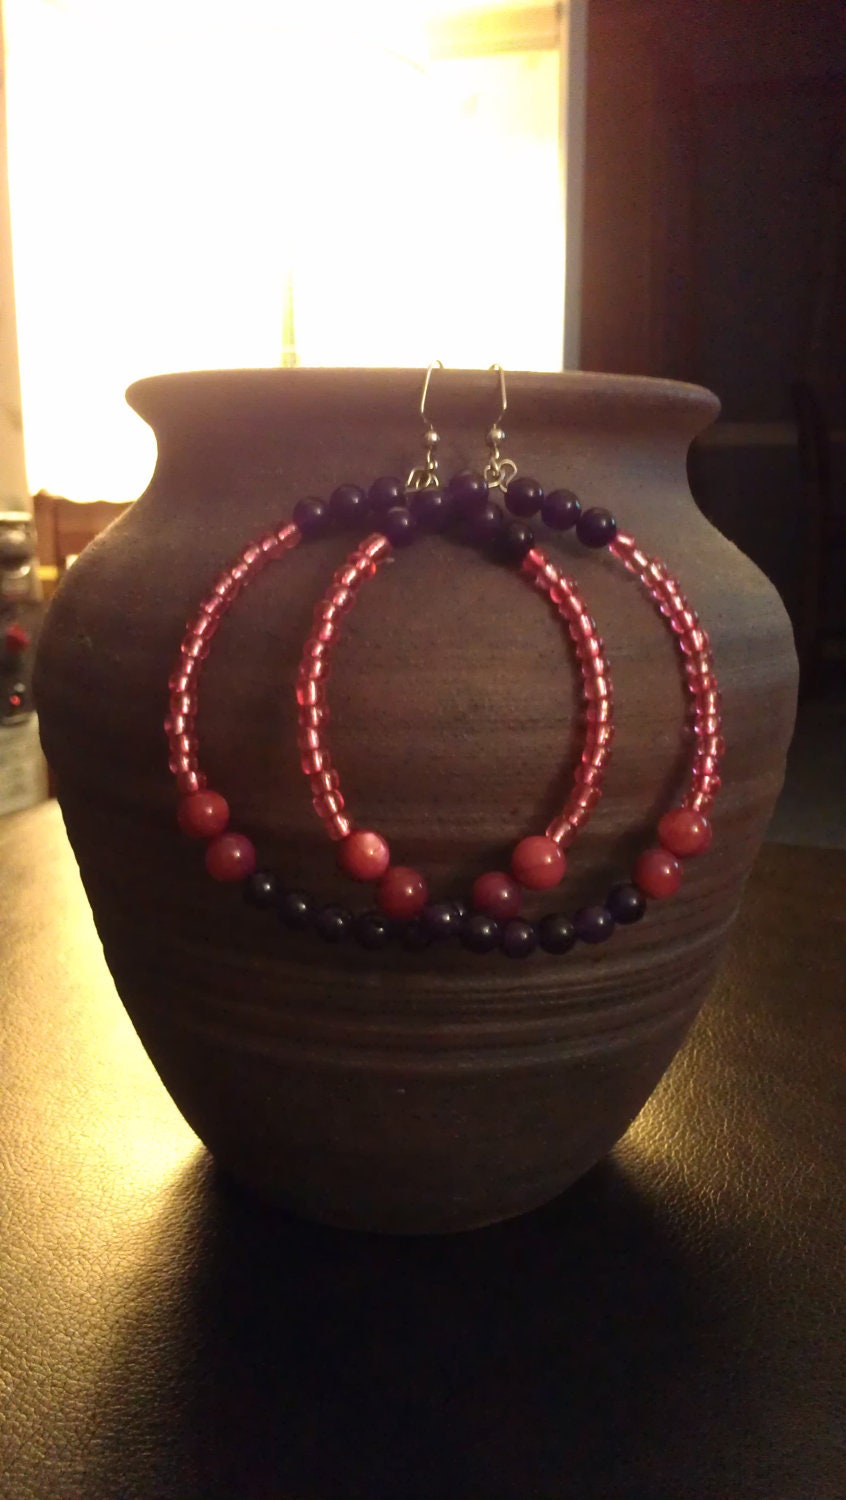 Purple and Pink Beaded Hoop Earrings with Glass Beads: "Sugar and Spice"